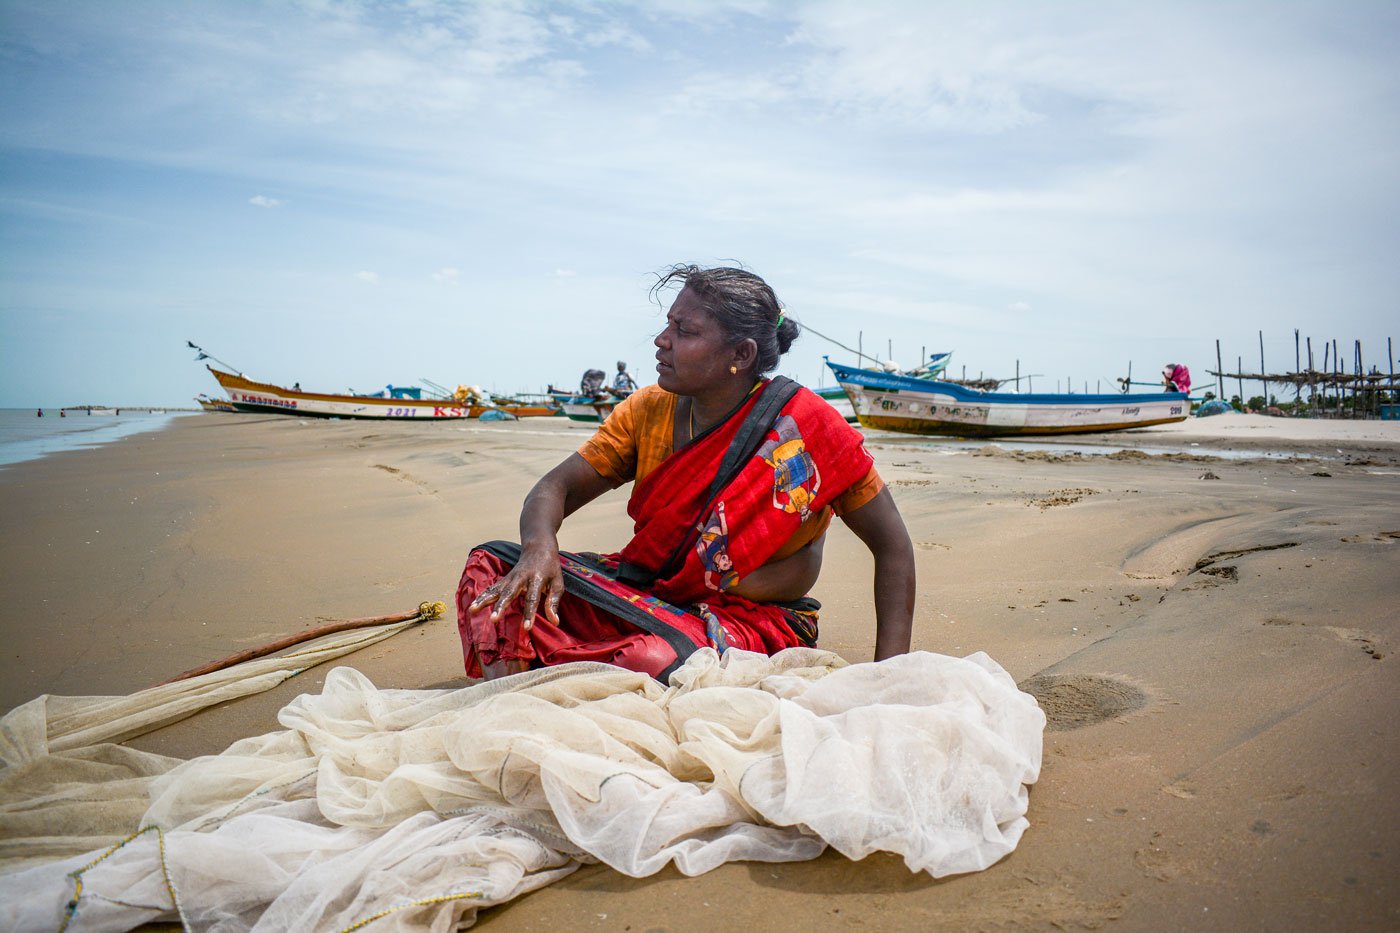 Kodiselvi relaxes on the shore in Vanavanmahadevi after collecting prawns from her nets.